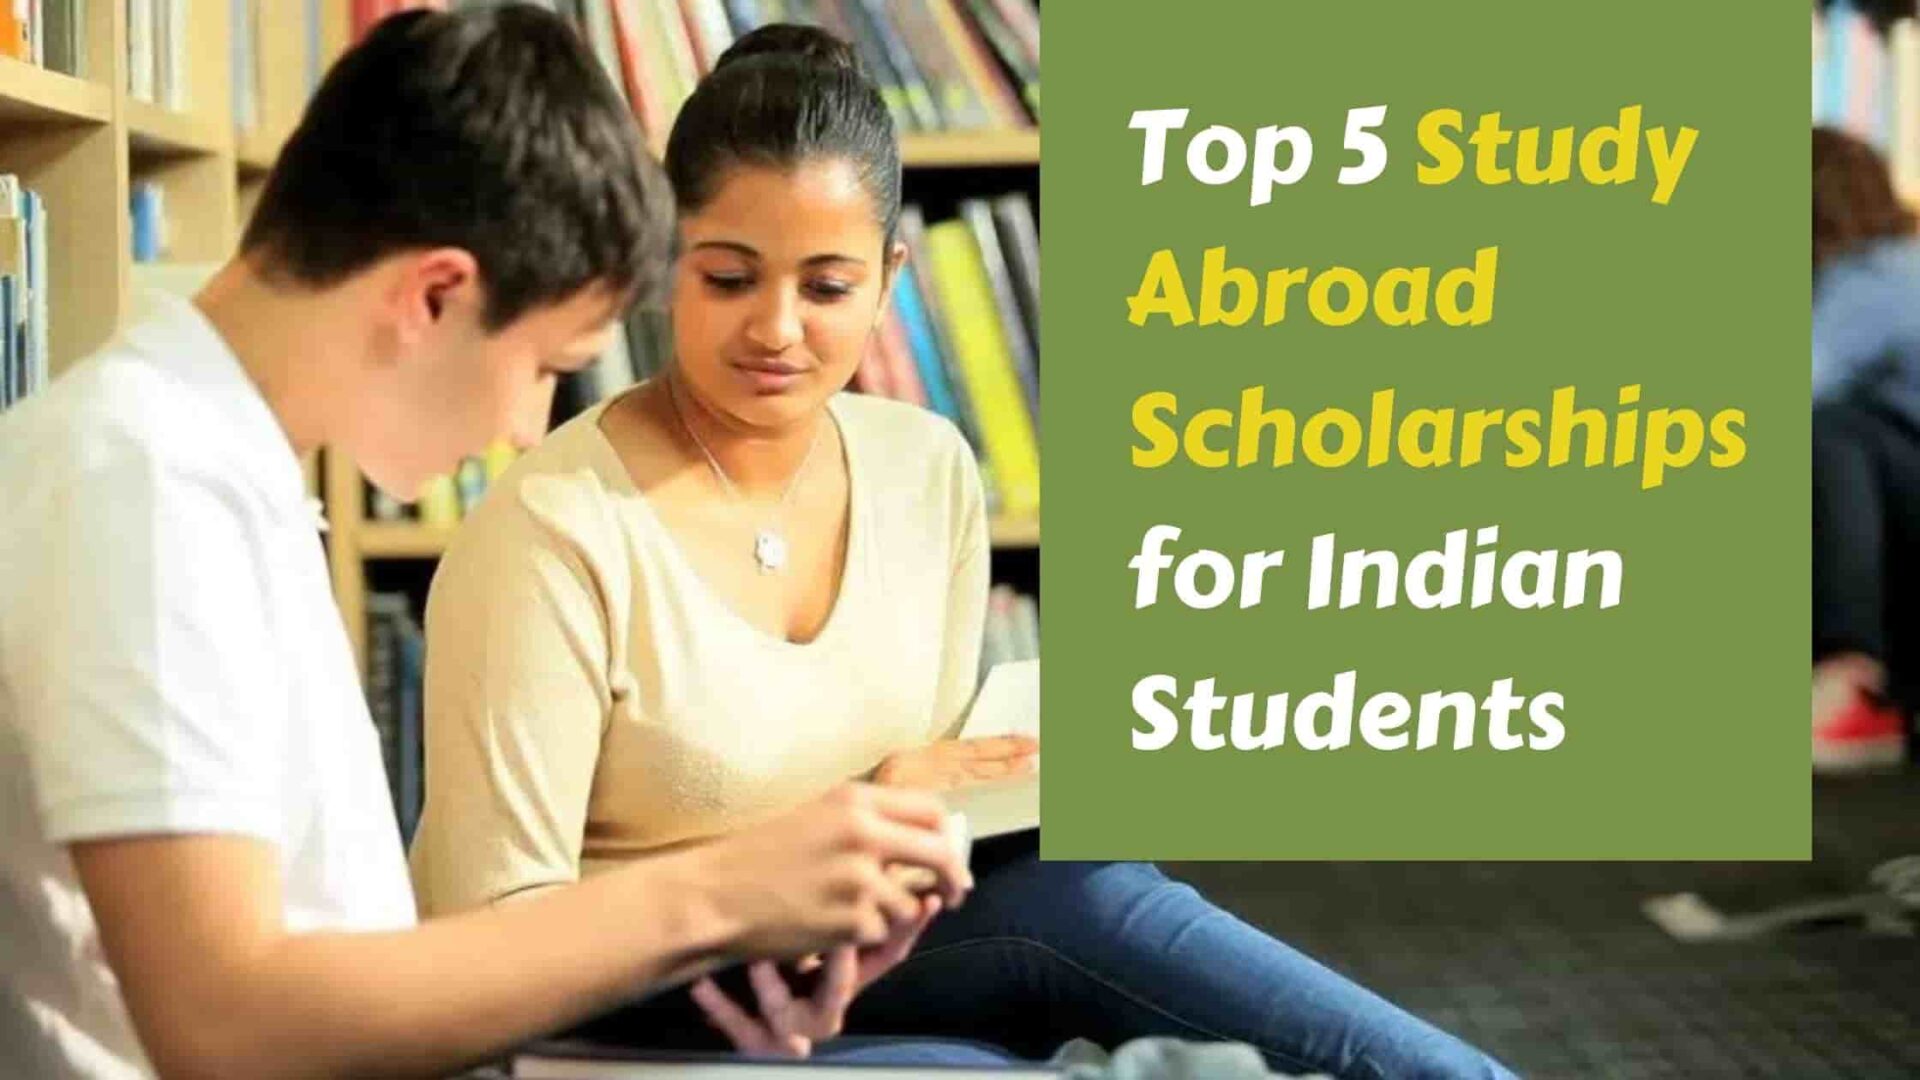 Top 5 Study Abroad Scholarships for Indian Students